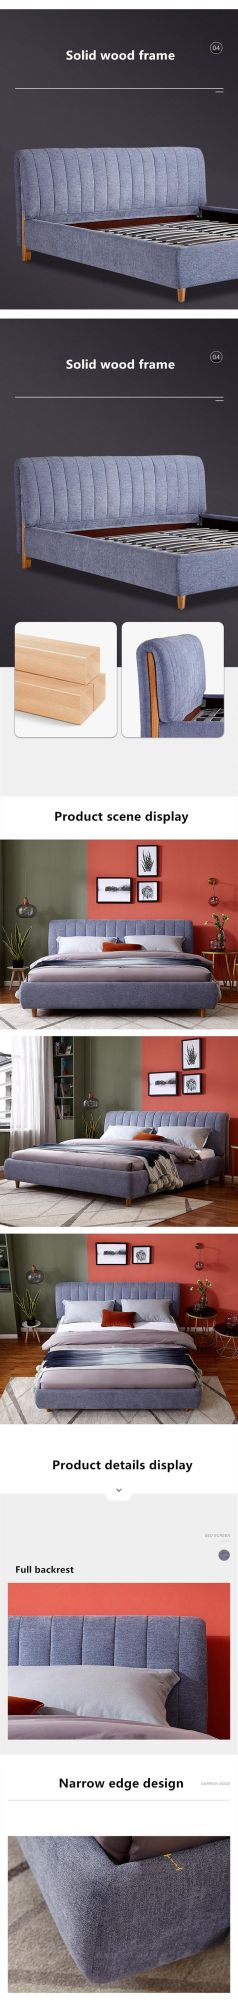 Nordic Double Soft #Bed Contracted Style #Furniture 0178-4